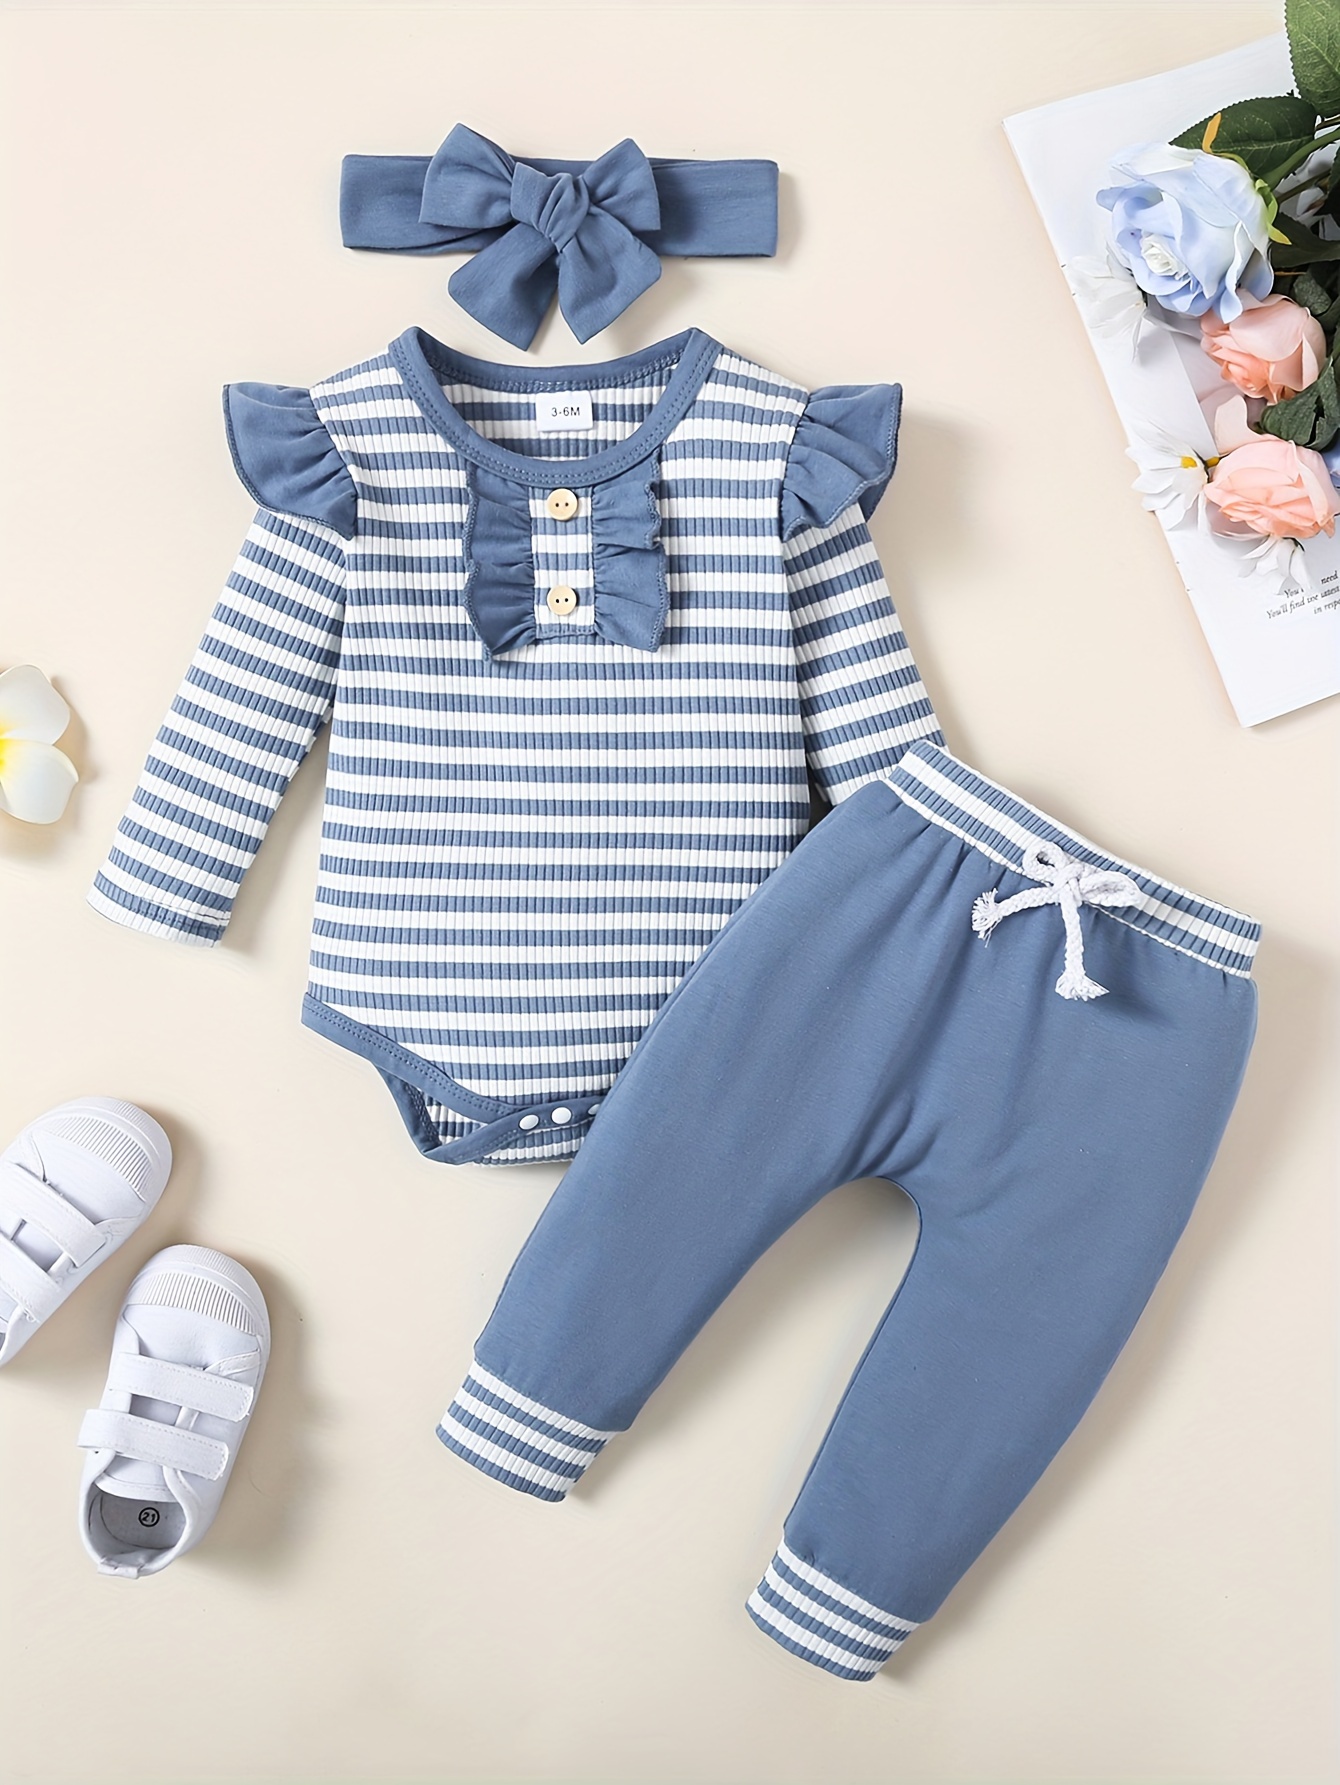  Newborn Girl Clothes Outfits Ruffle Baby Clothes Newborn Girls  Romper Tops Floral Pants with Headband Summer Baby Girl Clothes 0-3 Months:  Clothing, Shoes & Jewelry